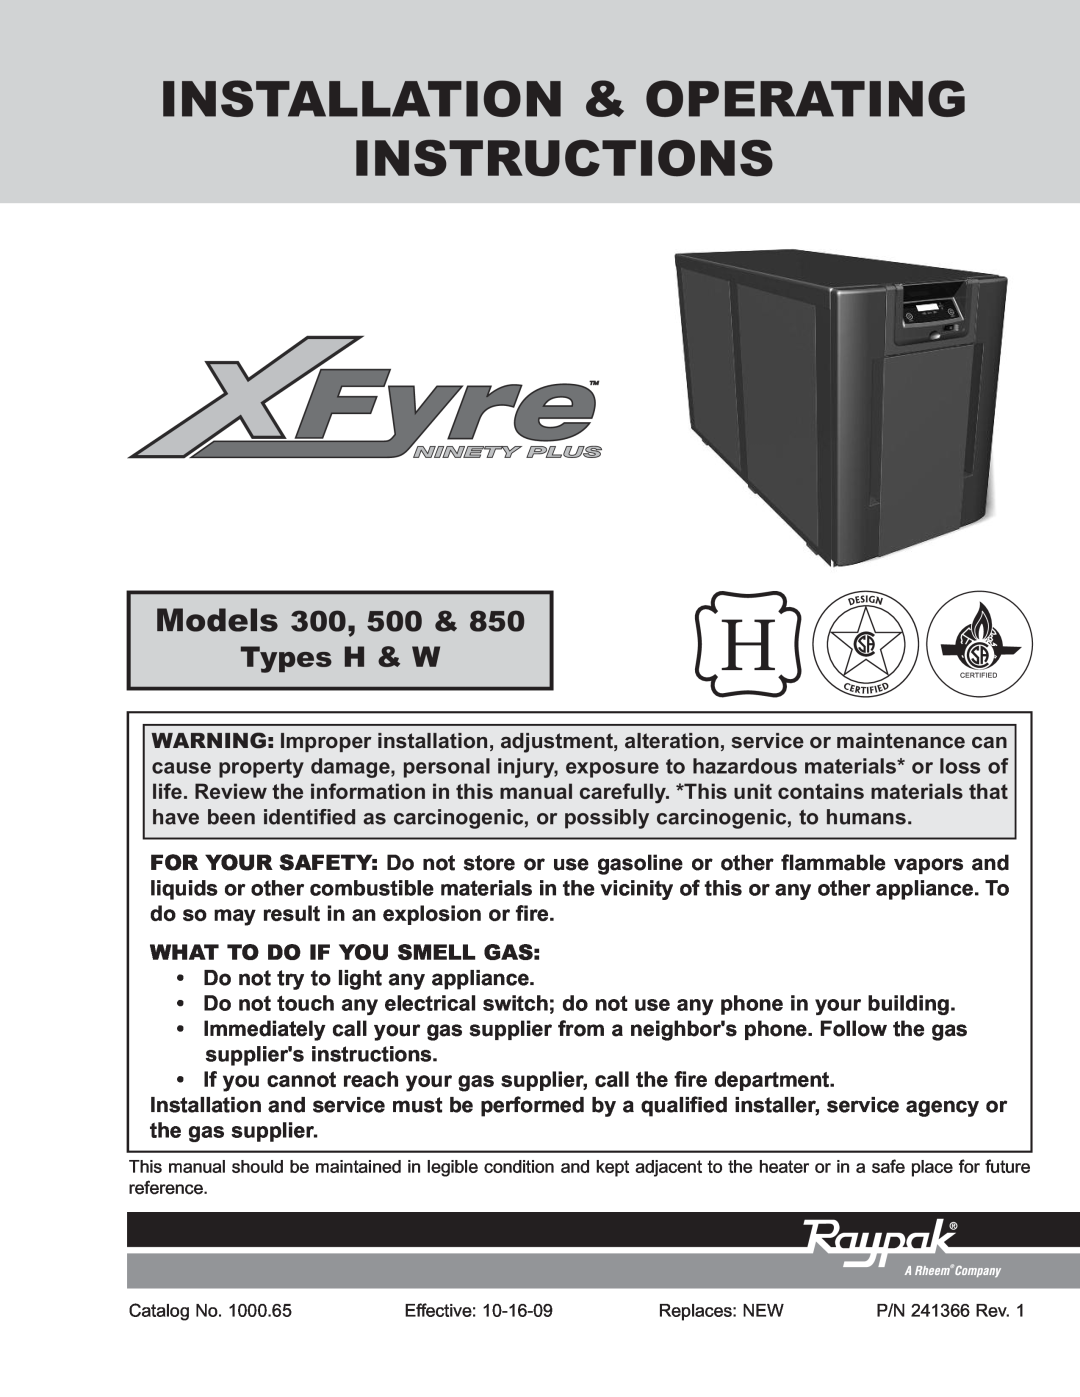 Raypak 300, 850 operating instructions What To Do If You Smell Gas, Do not try to light any appliance 